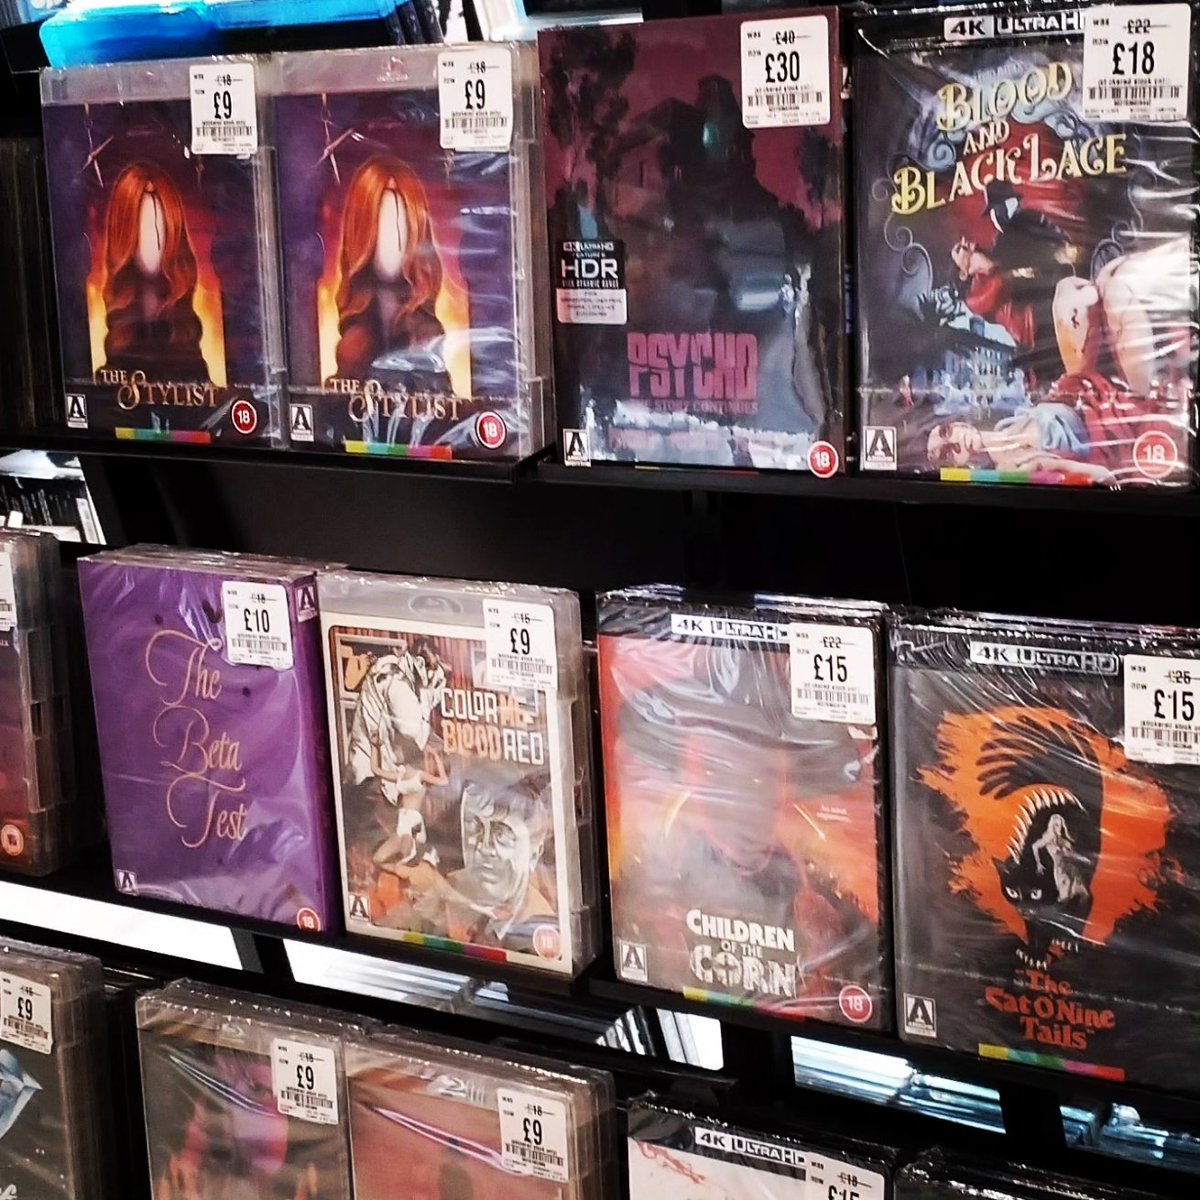 Our Arrow Video SALE is live NOW 😍👌 Pop in and grab your fill 🙌 @FOPPofficial @WhatsOnGlasgow #gettofopp @ArrowVidEvents #arrowvideo #films #movies #bluray #sale #reducedprices #4KUltraHD #Cinema #bluraycollection